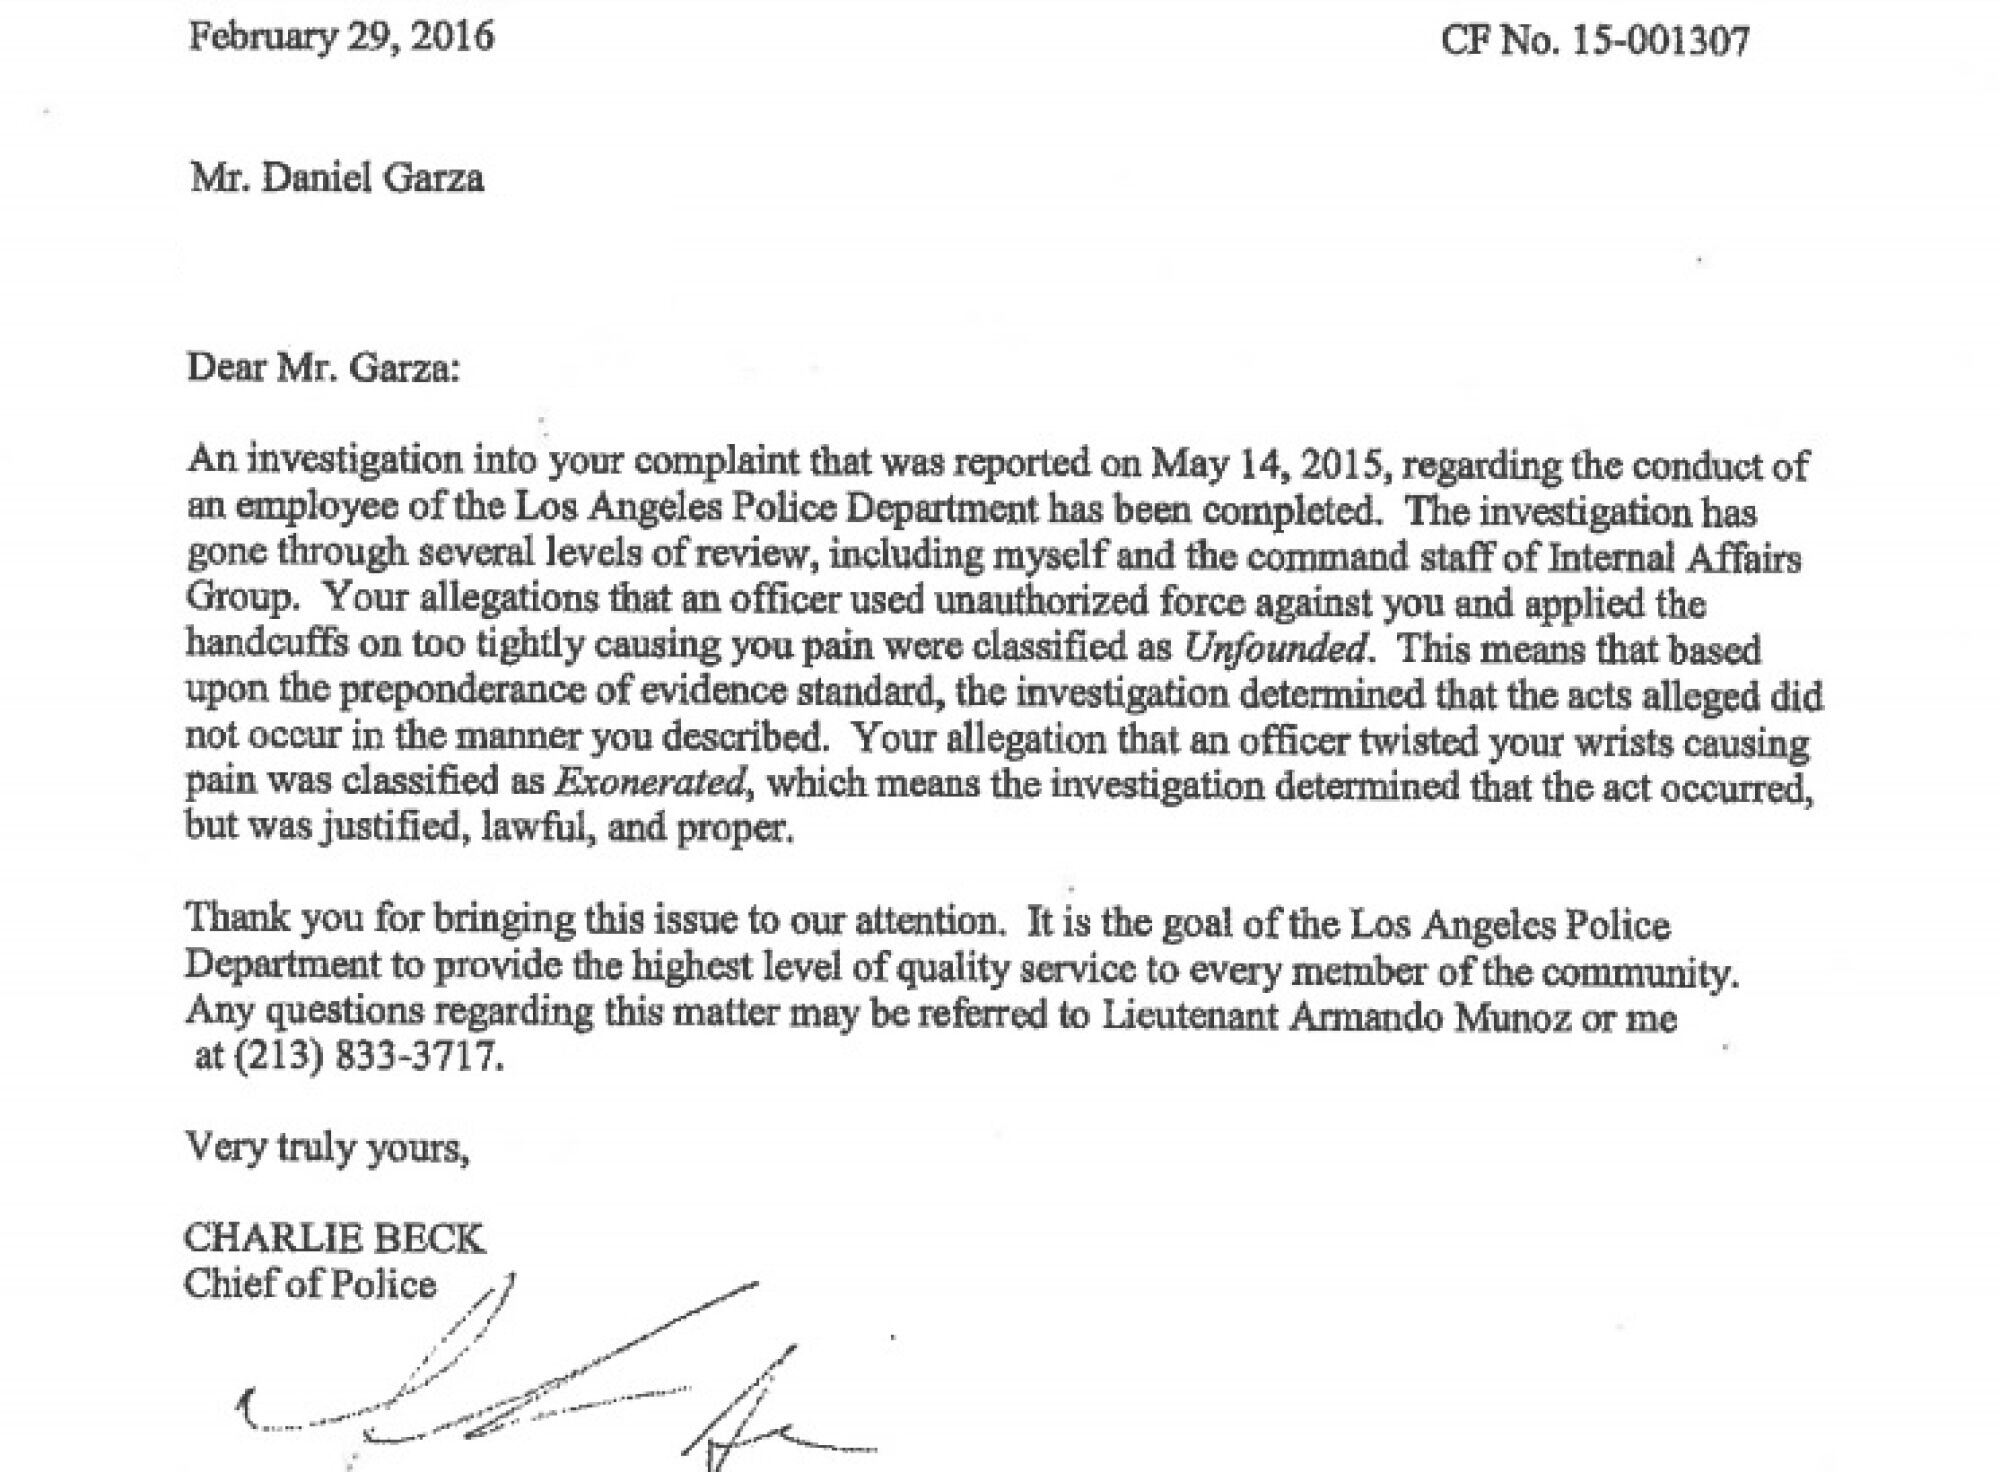 A letter from LAPD to Daniel Garza says his complaint about the wrist hold was classified as "Exonerated."